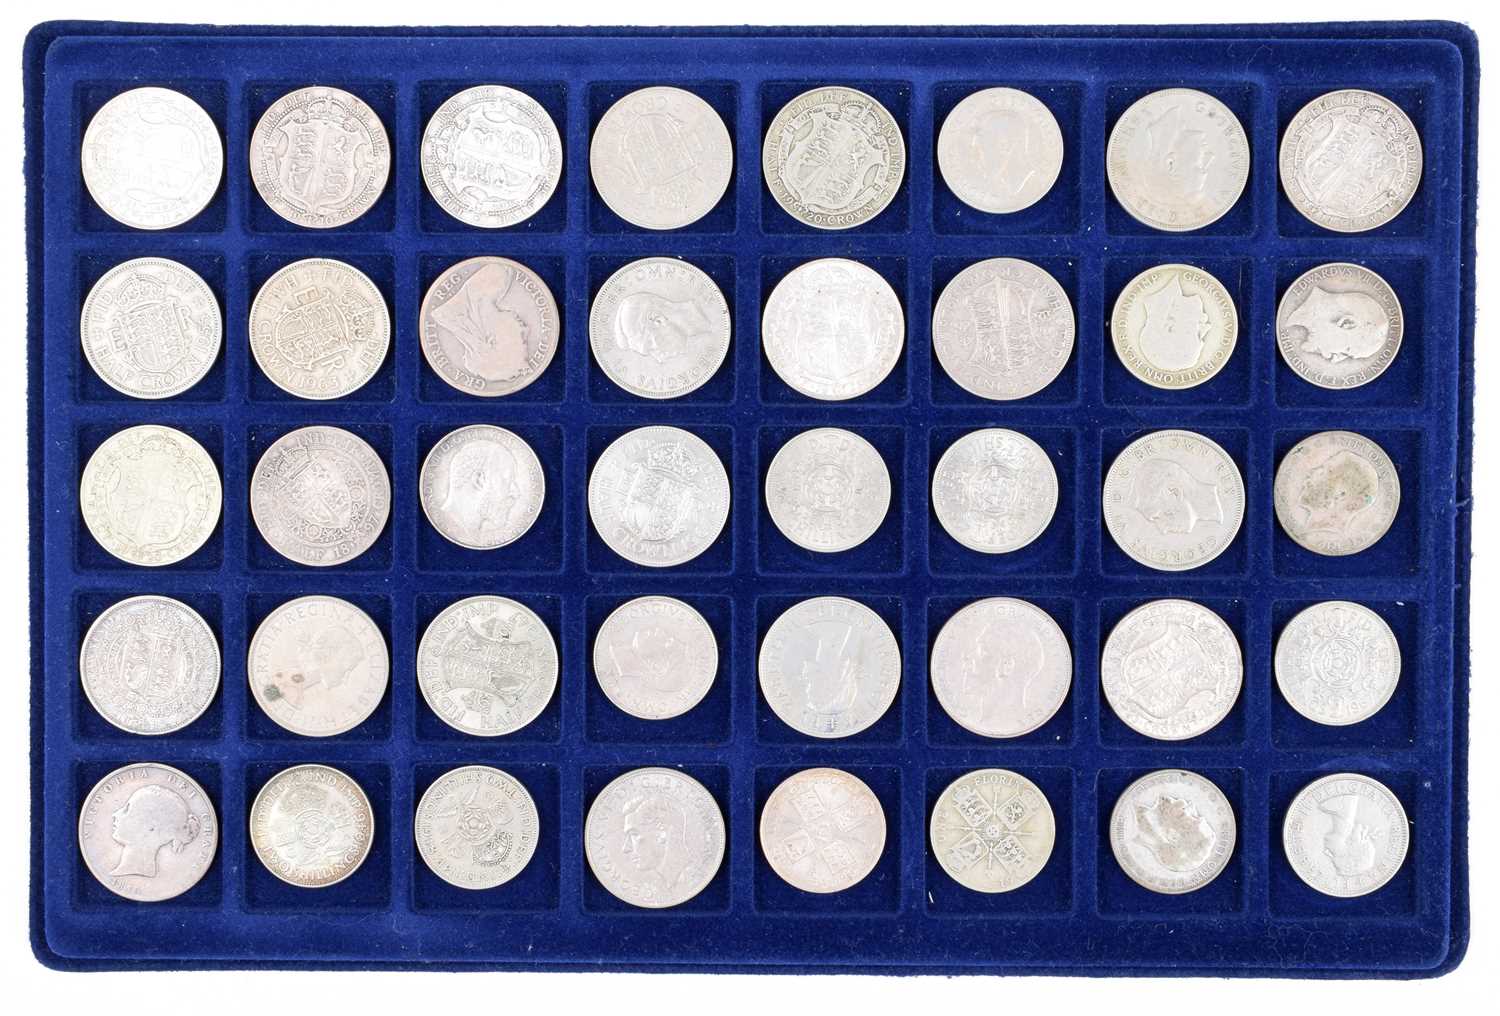 Collection of coins from George III to Elizabeth II to include many denominations. - Image 3 of 6